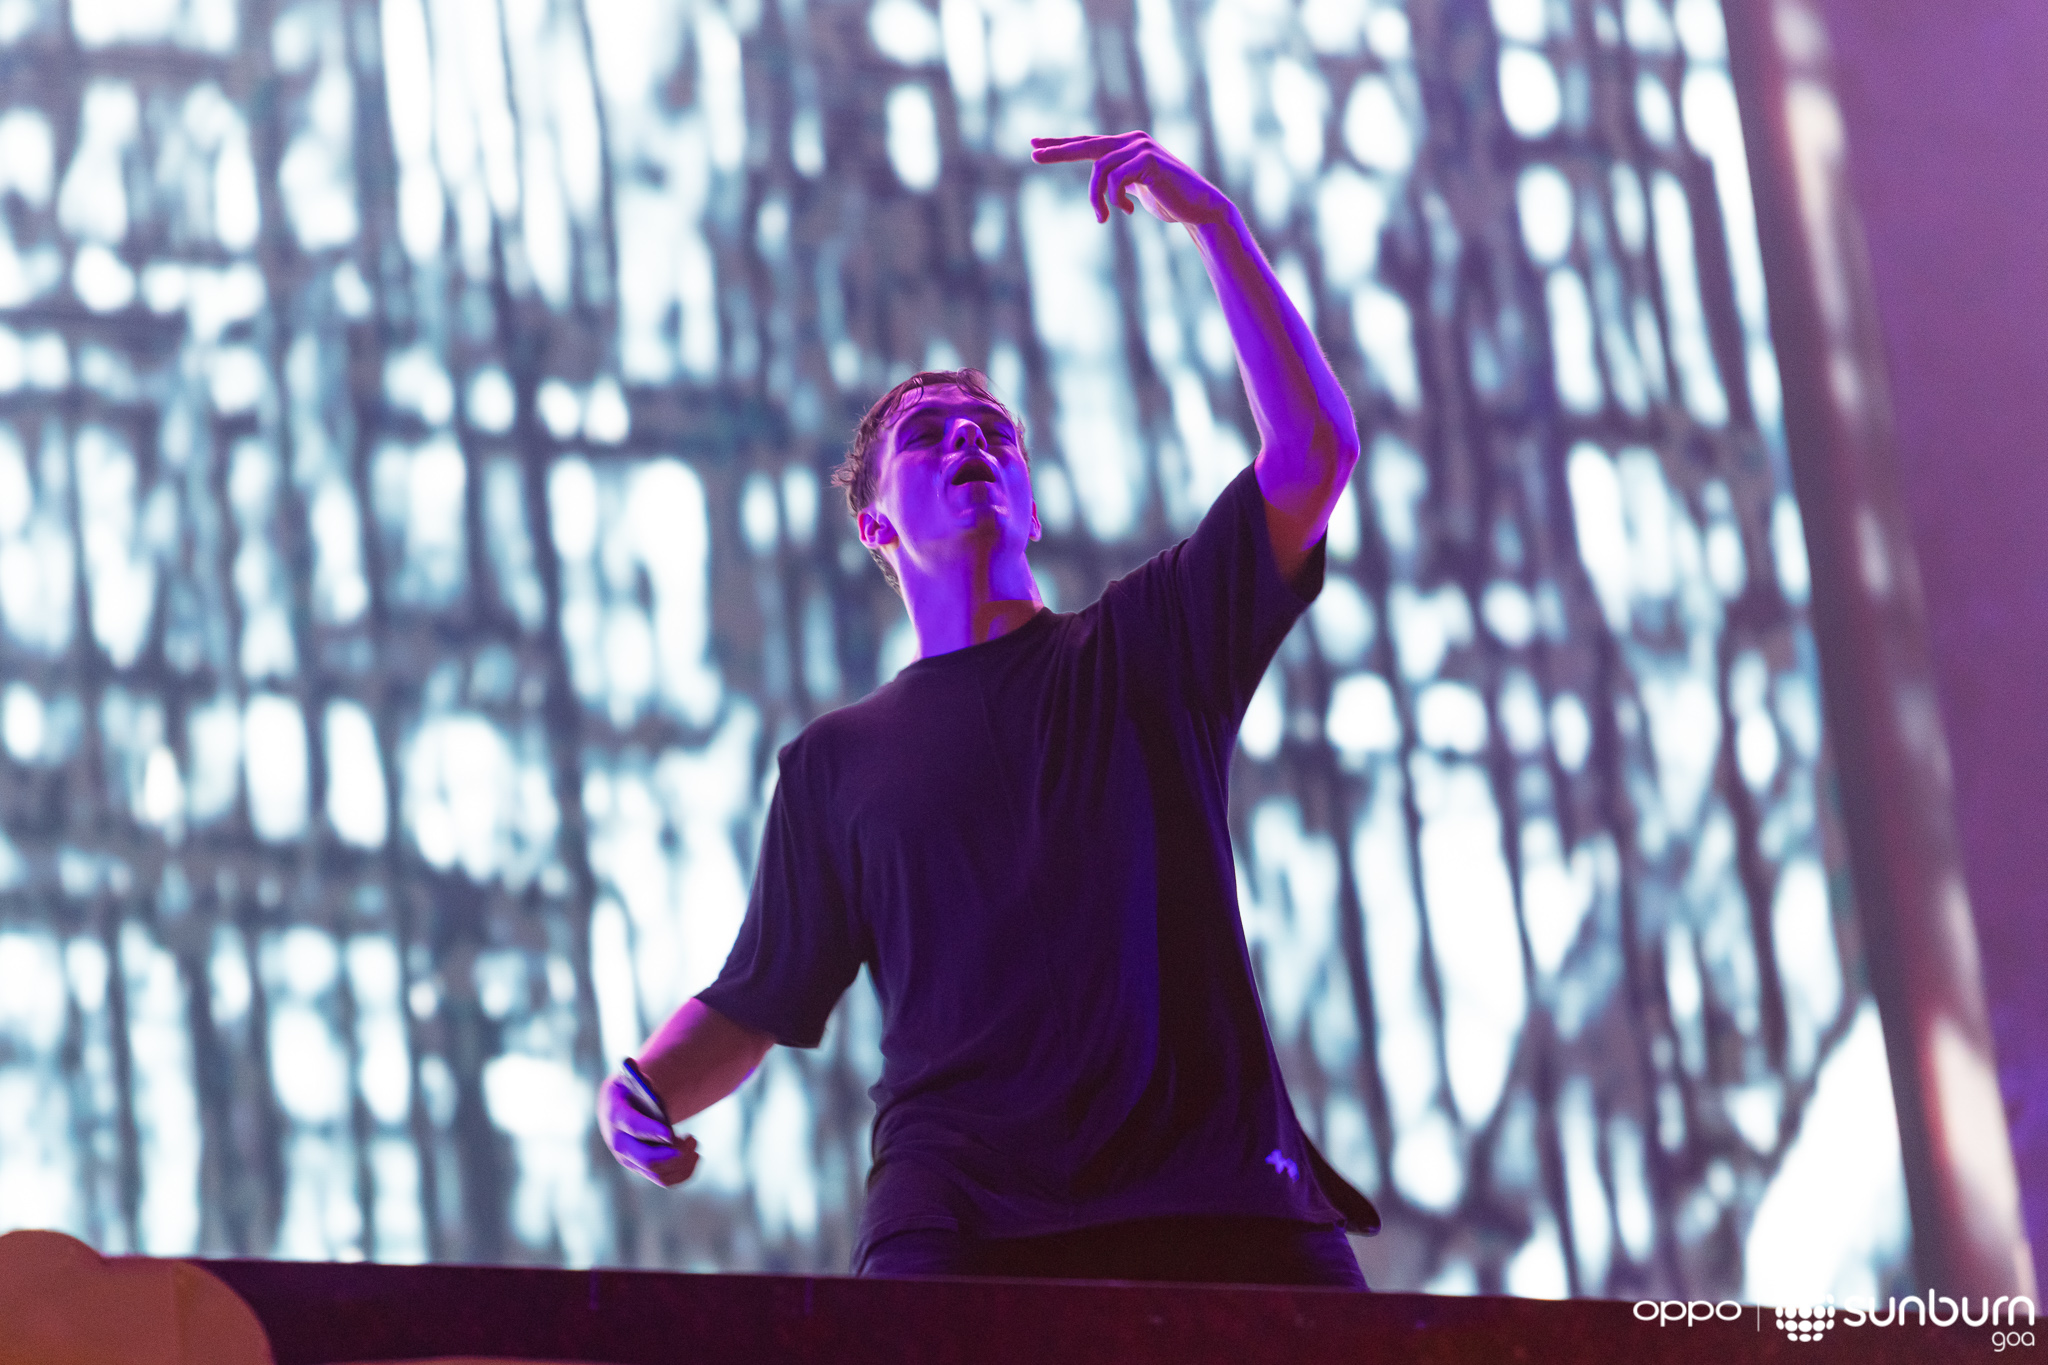 Sunburn Goa 2019 gets the right end with Martin Garrix, Maceo Plex and Luciano’s performances